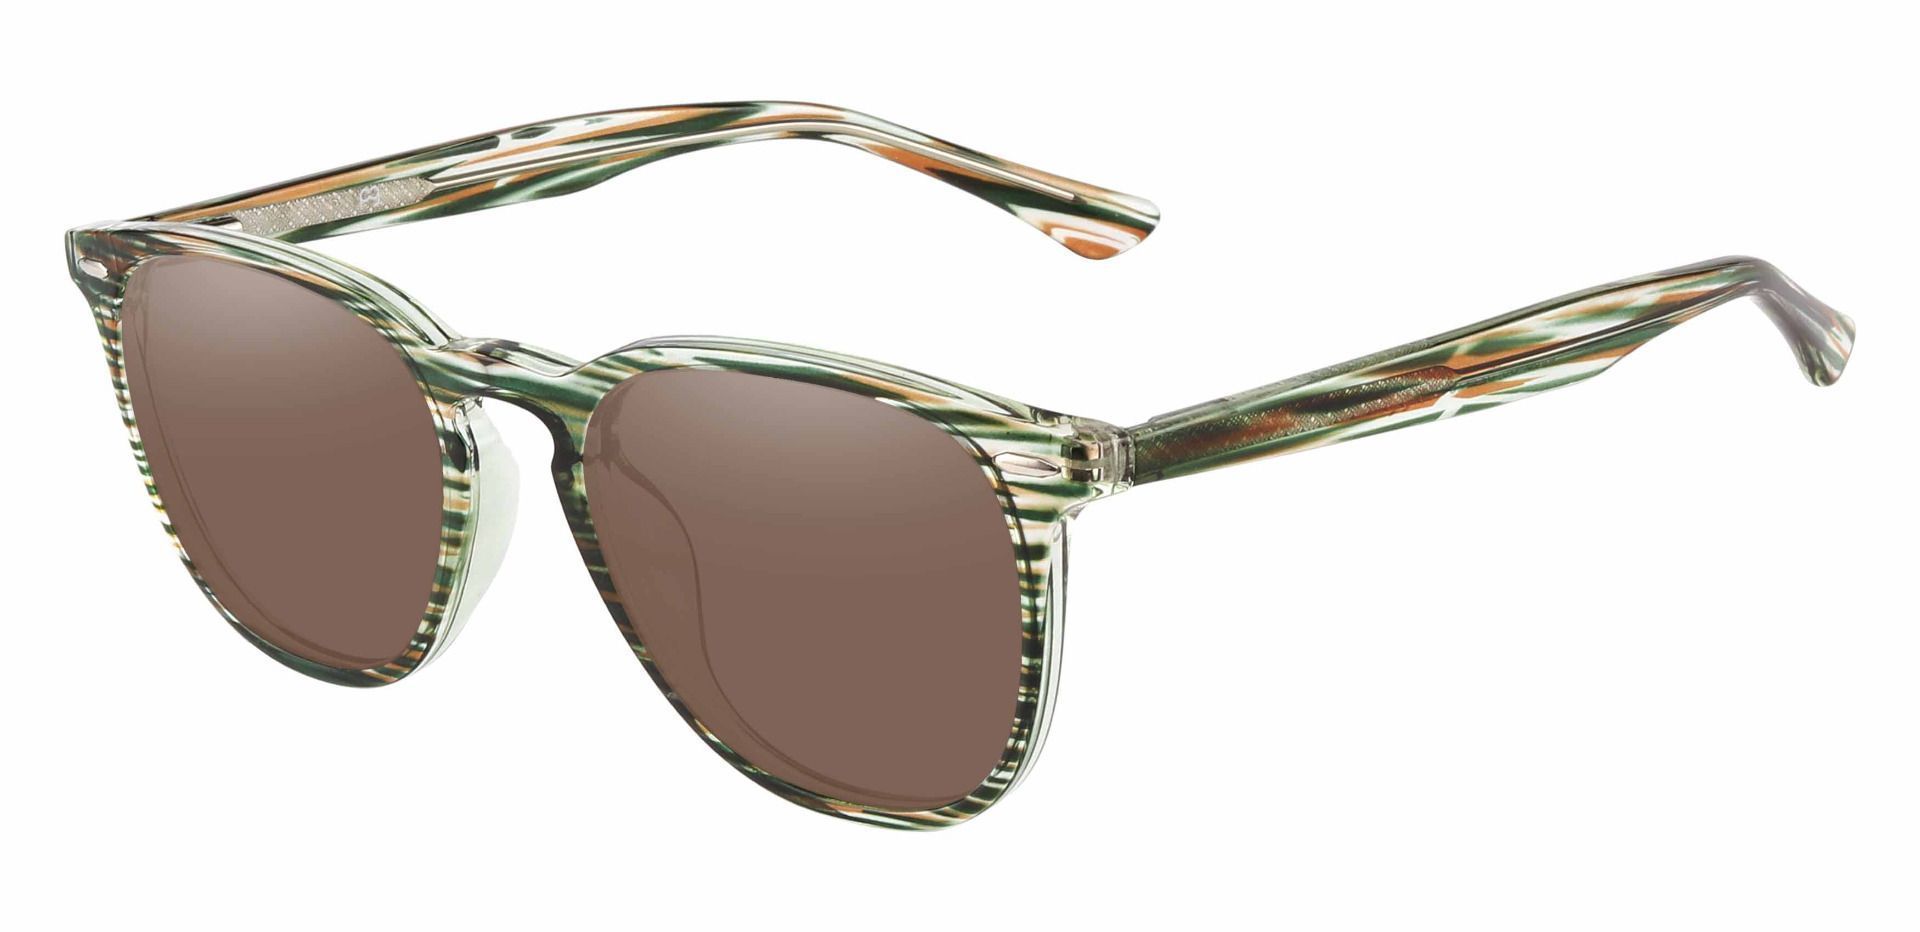 Sycamore Oval Reading Sunglasses - Green Frame With Brown Lenses